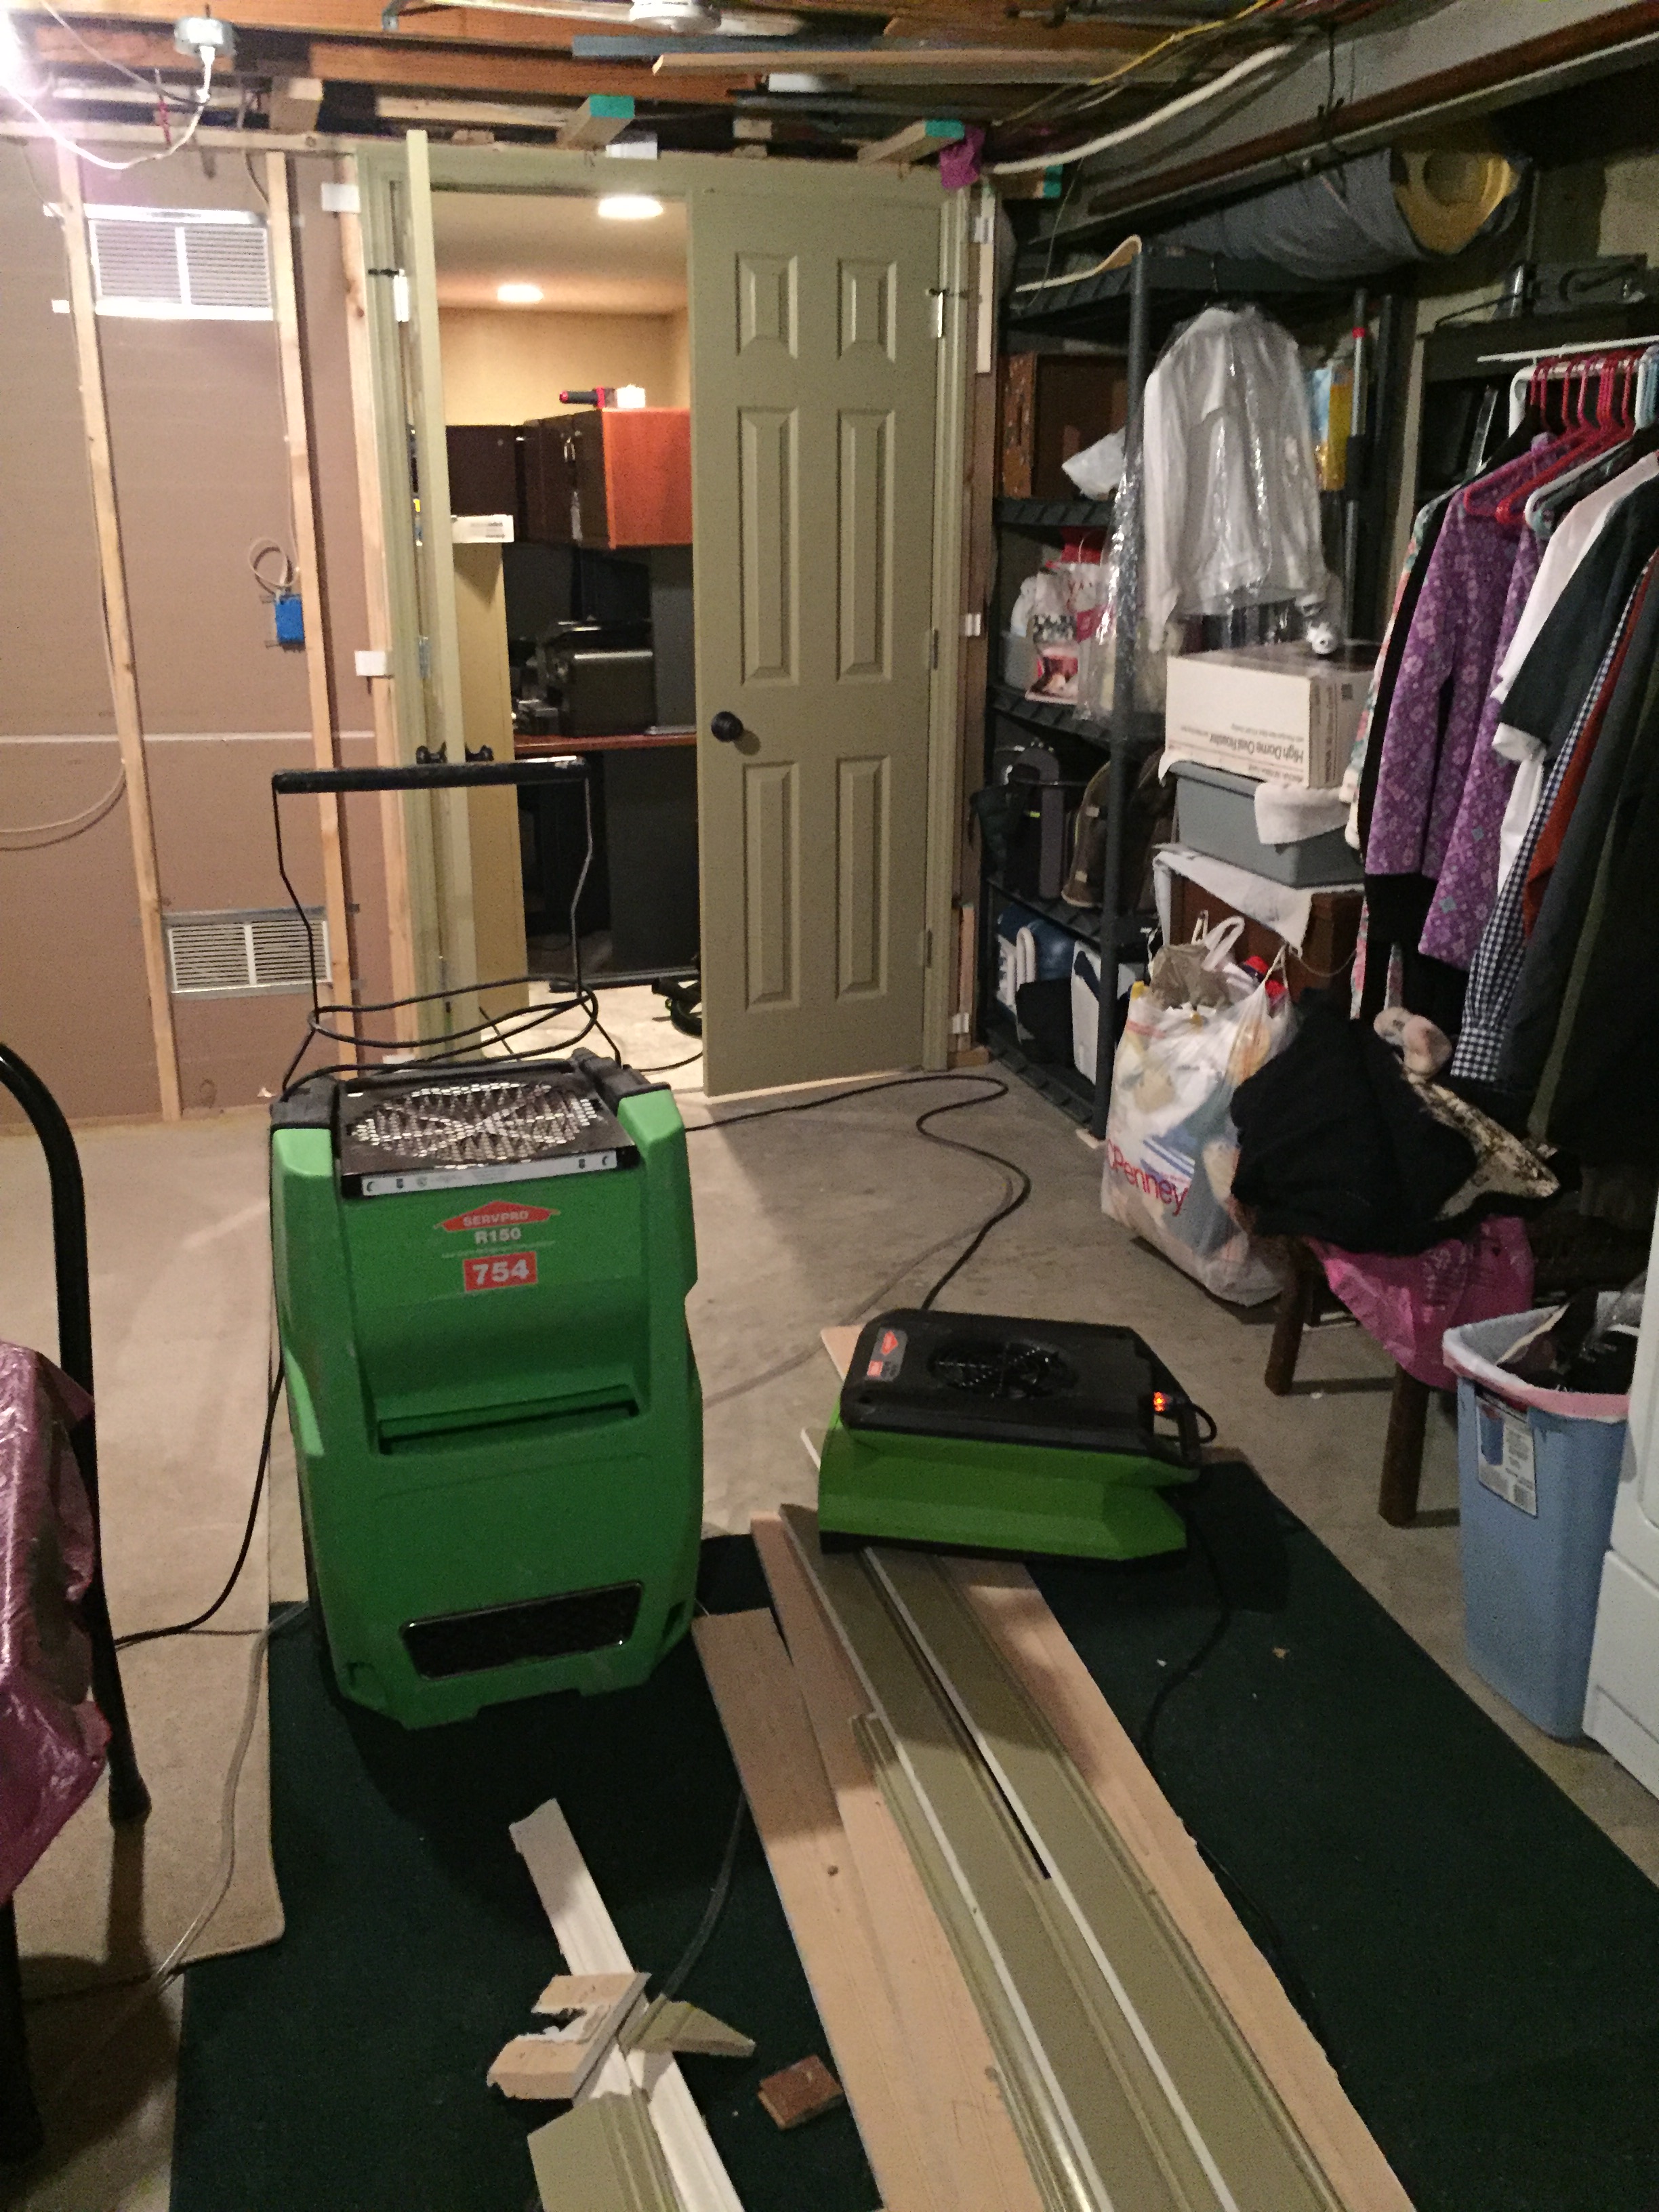 Water damage? It's no problem for SERVPRO.